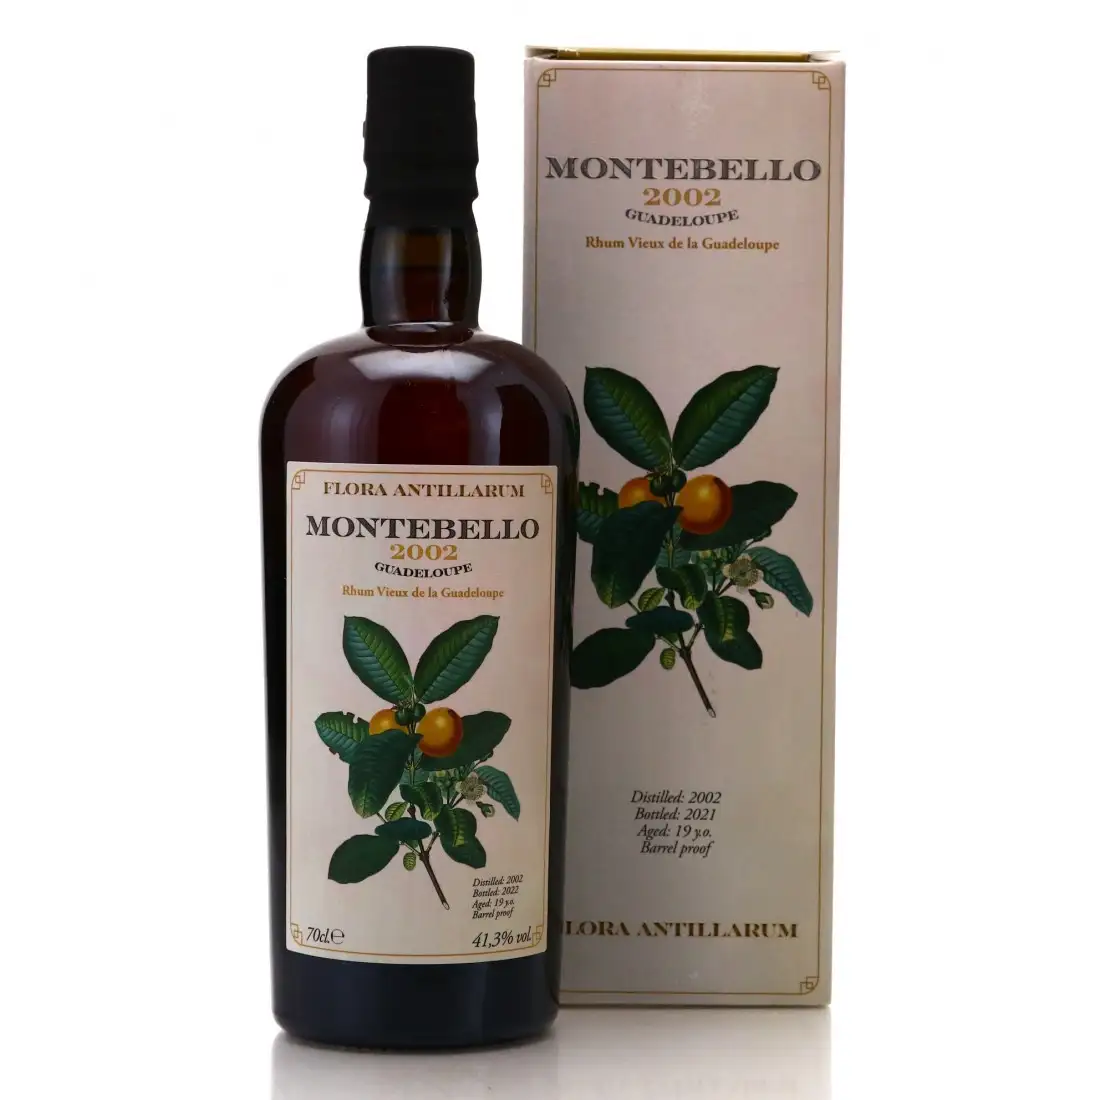 Image of the front of the bottle of the rum Montebello Flora Antillarum